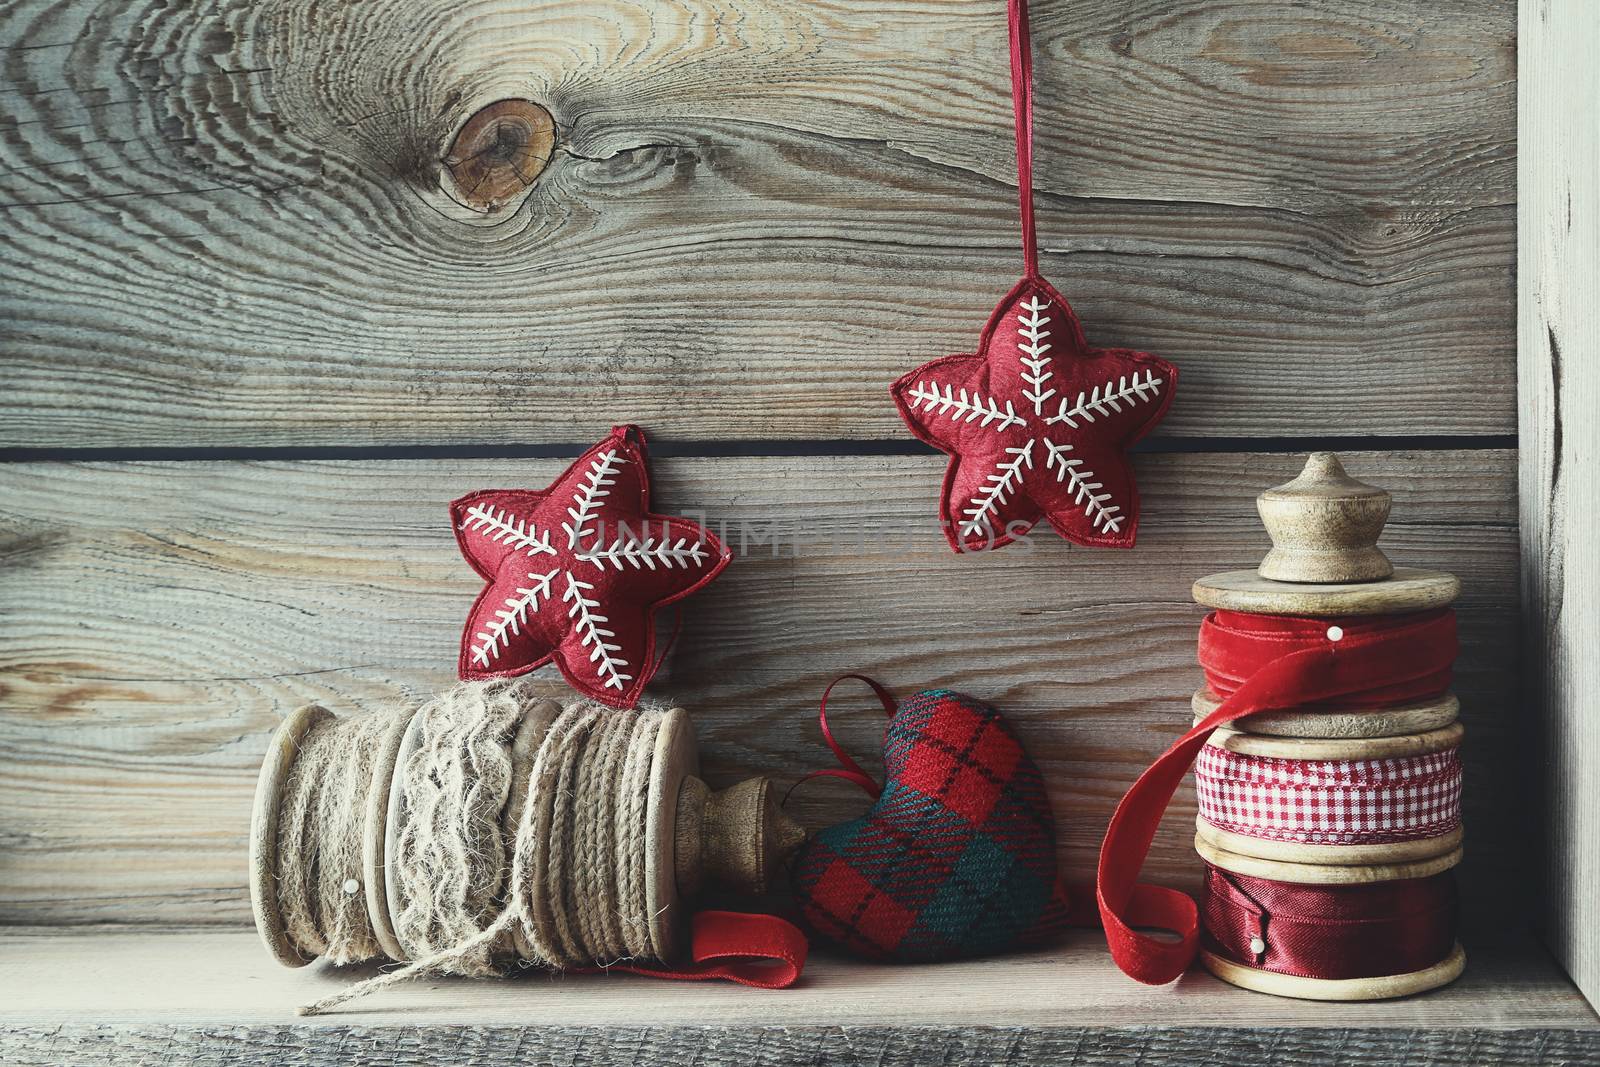 Ribbons and holiday ornaments on wood shelf by Sandralise